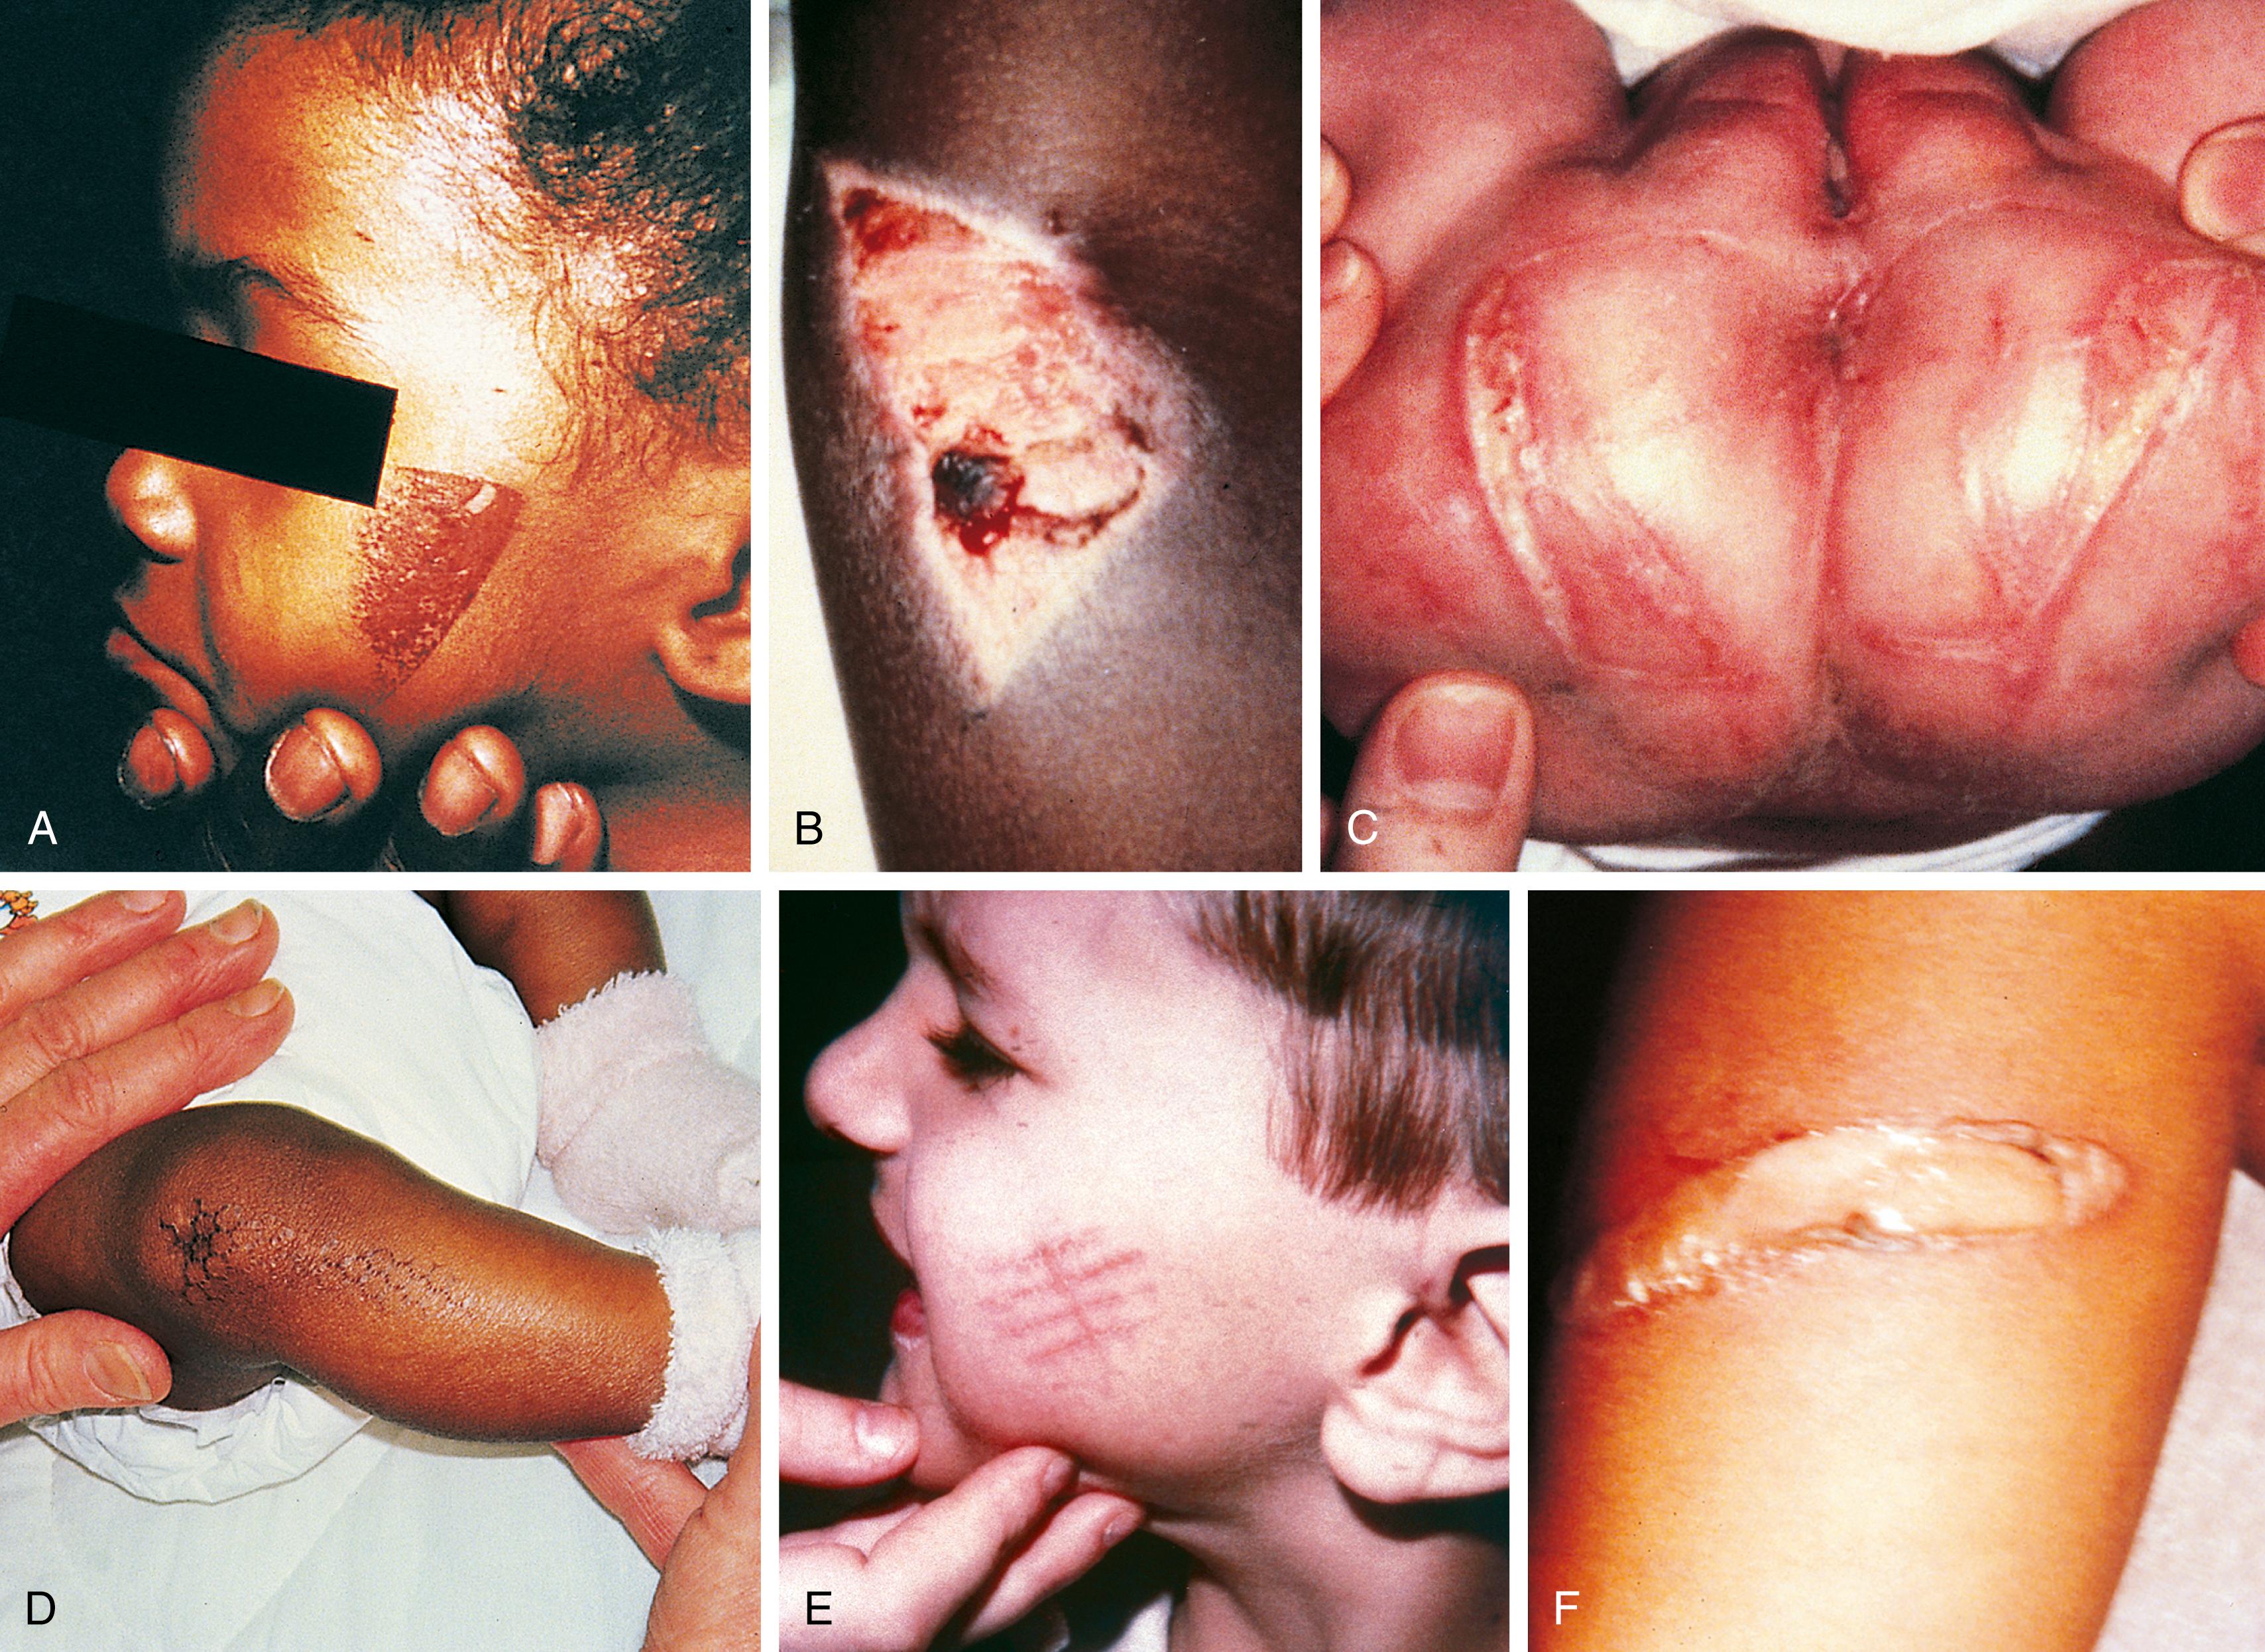 Fig. 6.17, Contact burns or branding injuries. (A) This child, who was acting out while his mother ironed, was punished when she held the tip of the iron against his cheek. (B) A healing full-thickness burn in the shape of an iron was found when this boy’s shirt was removed prior to his being given vaccine injections. He had been sent home after his first day in kindergarten with instructions not to return until he was caught up on his immunizations. (C) These linear full-thickness burns were incurred when this 6-week-old infant was forced to sit on the hot grill of a space heater. The history given was that she had crawled over to the space heater, knocked it over, and then sat on it. (D) Another infant presented with a history of irritability and a rash. The “rash” has a honeycomb configuration that matched that of a radiator cover in her home. She also had multiple fractures. (E) These facial burns are the result of being branded with the grill of a hair dryer. The boy had been acting out while he was supposed to be getting ready for school and his mother was drying her hair. (F) The hot wand of a curling iron leaves a cigar-shaped, partial- to full-thickness burn.